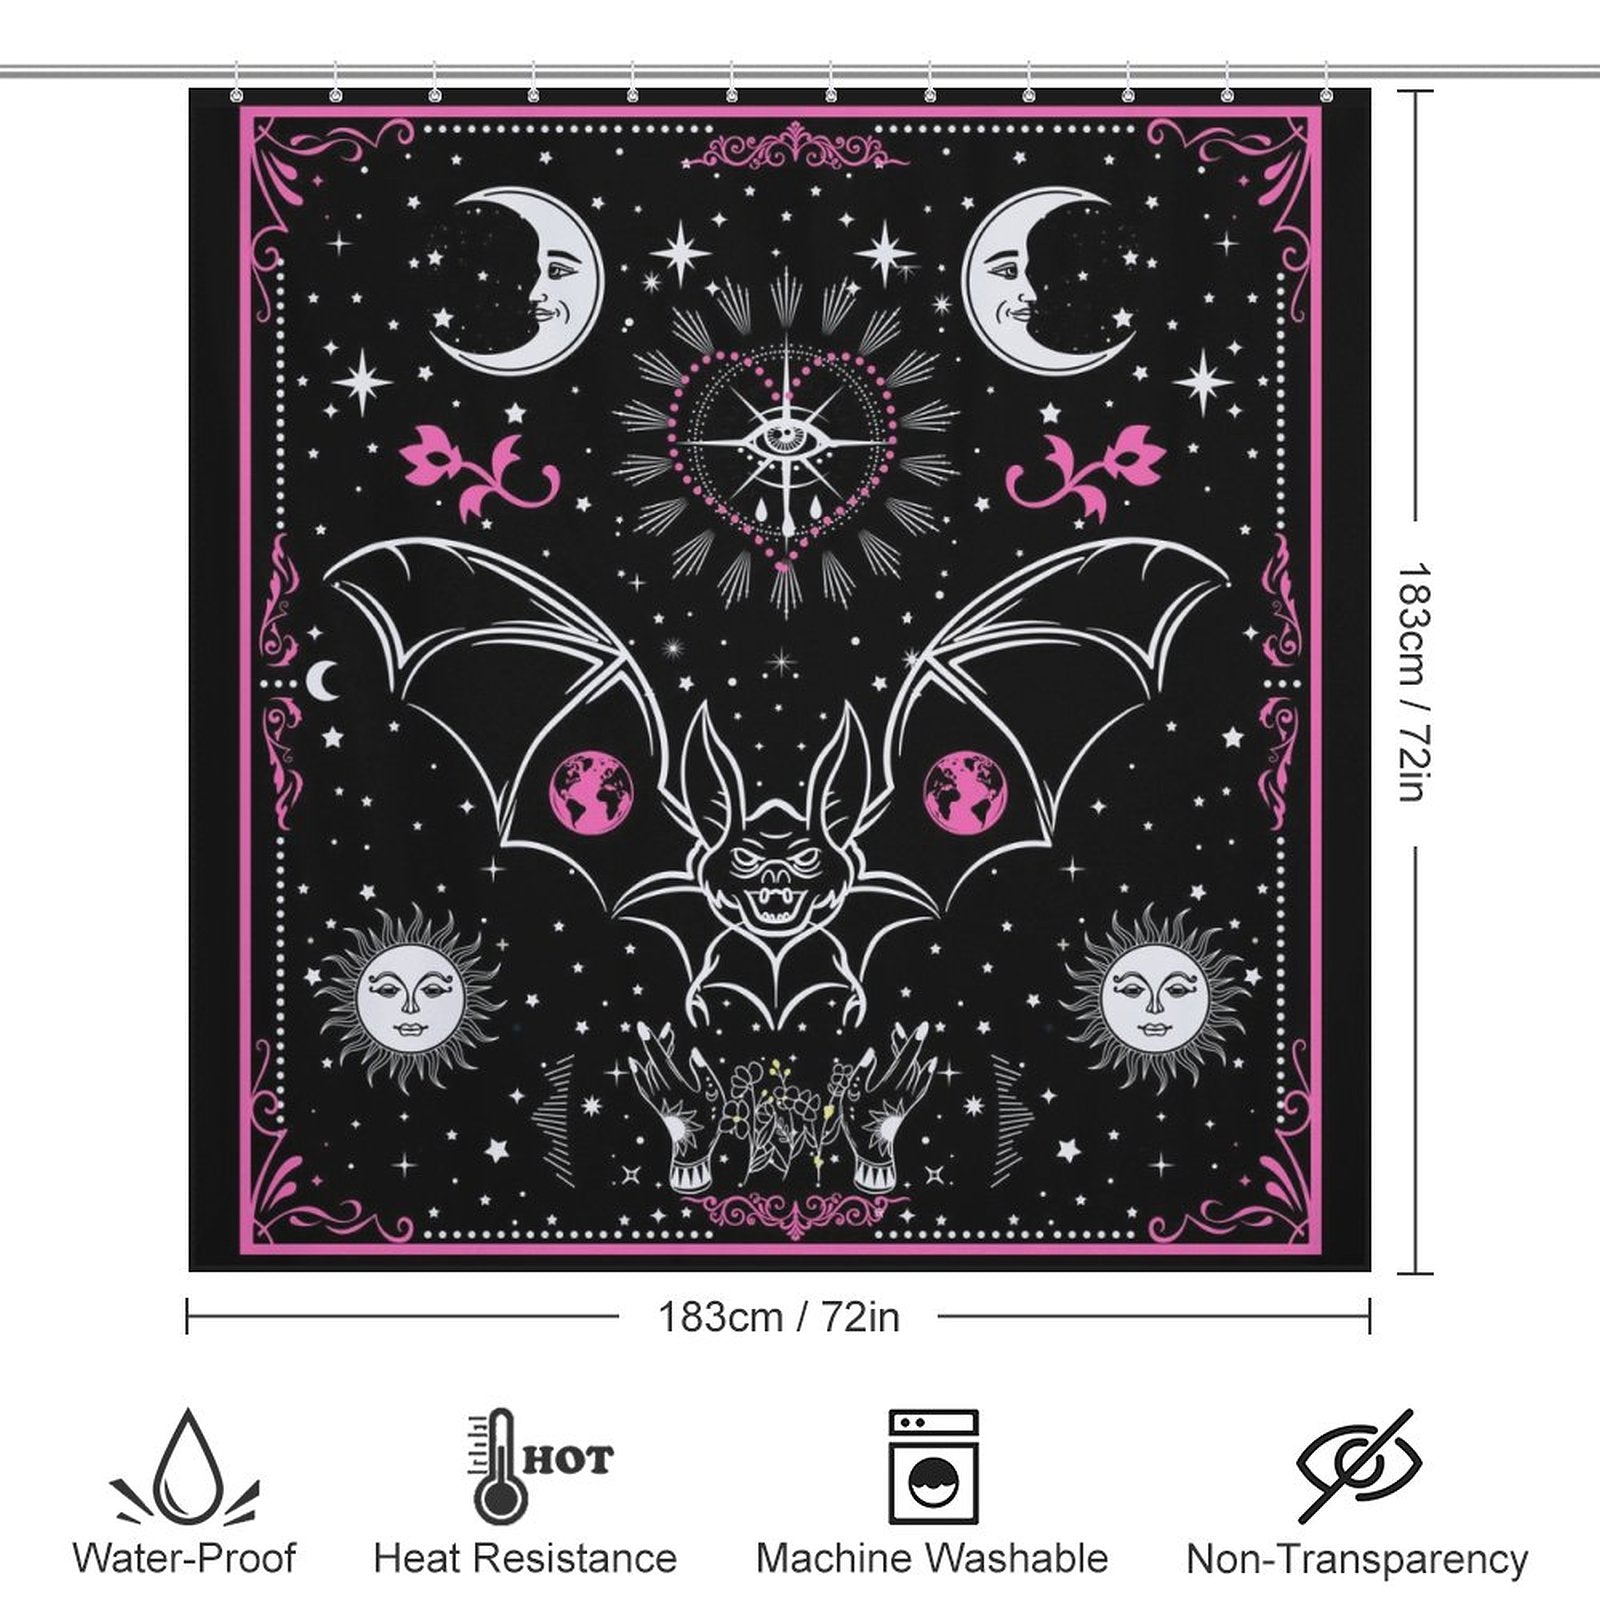 A waterproof Tarot Bat Shower Curtain-Cottoncat with bats and moons on it.